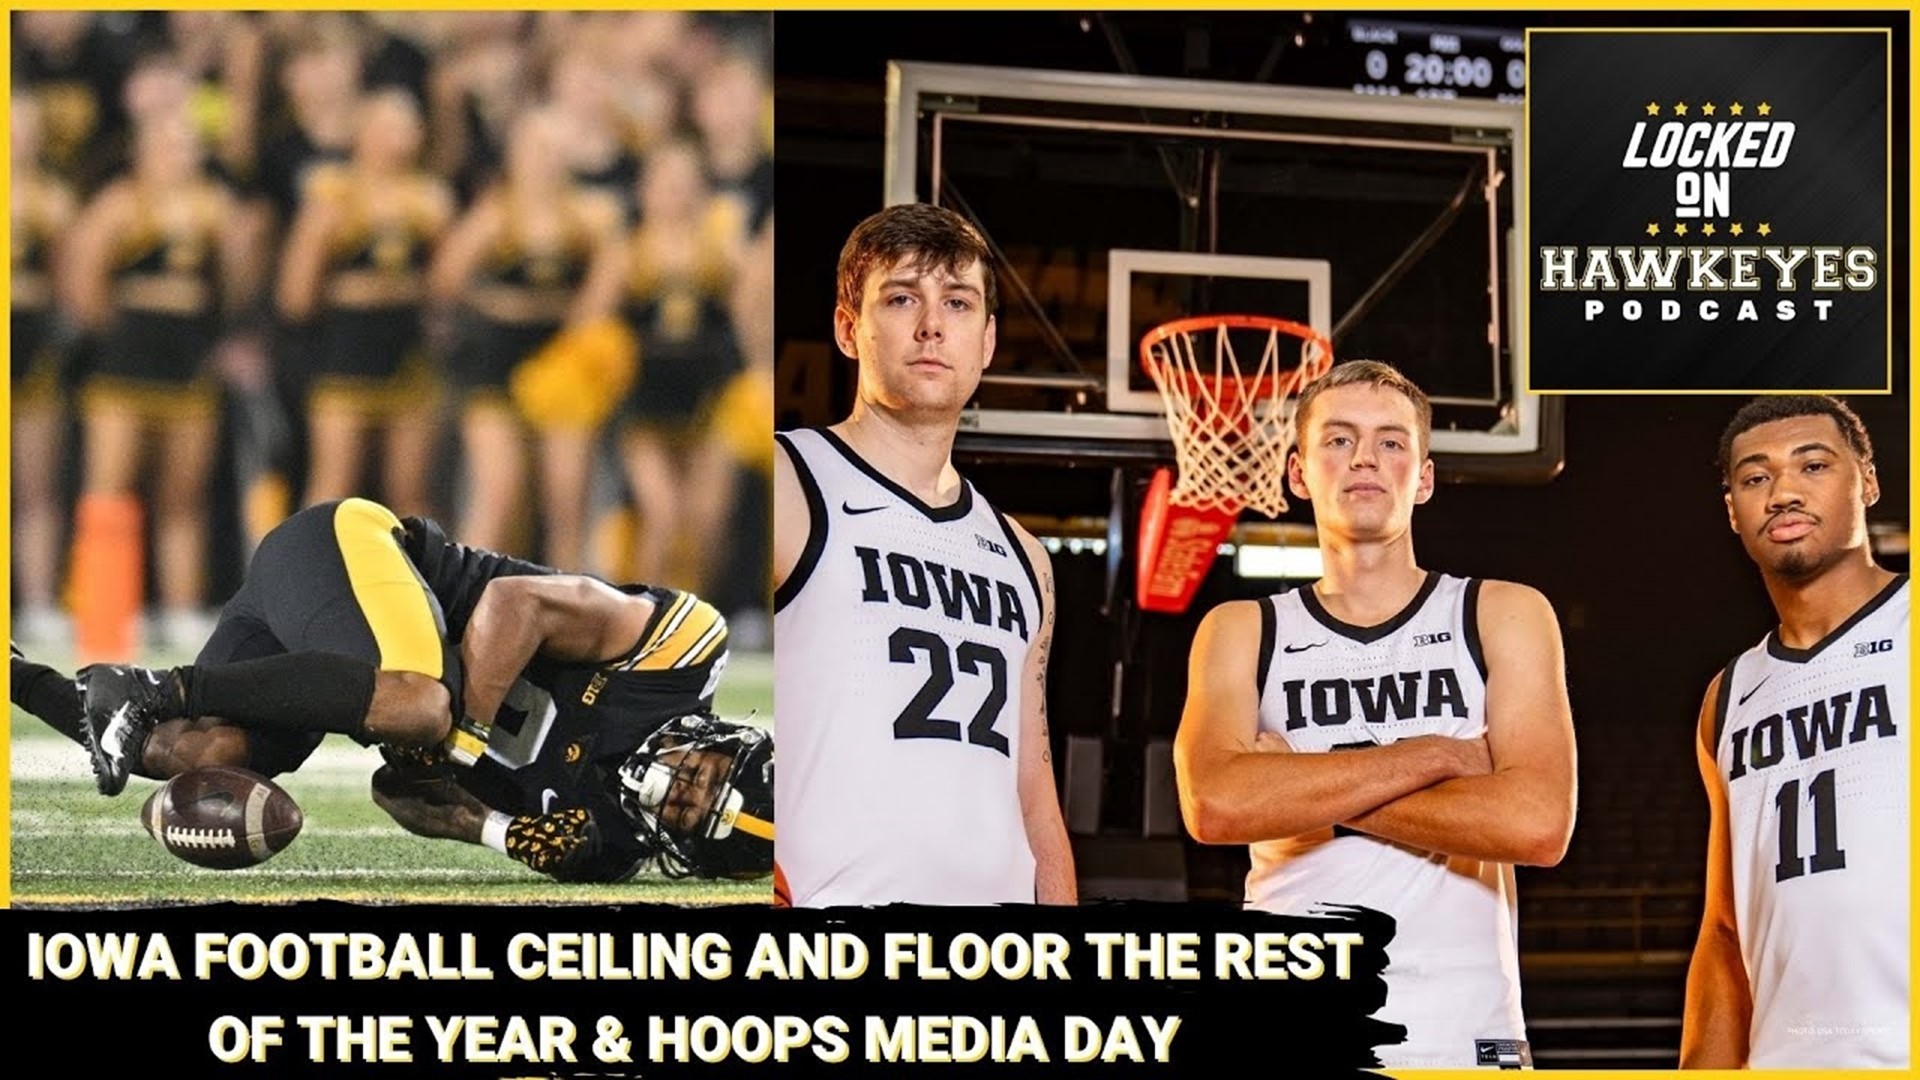 Iowa Football: What's the ceiling & floor with the Cade McNamara injury & Hoops media day